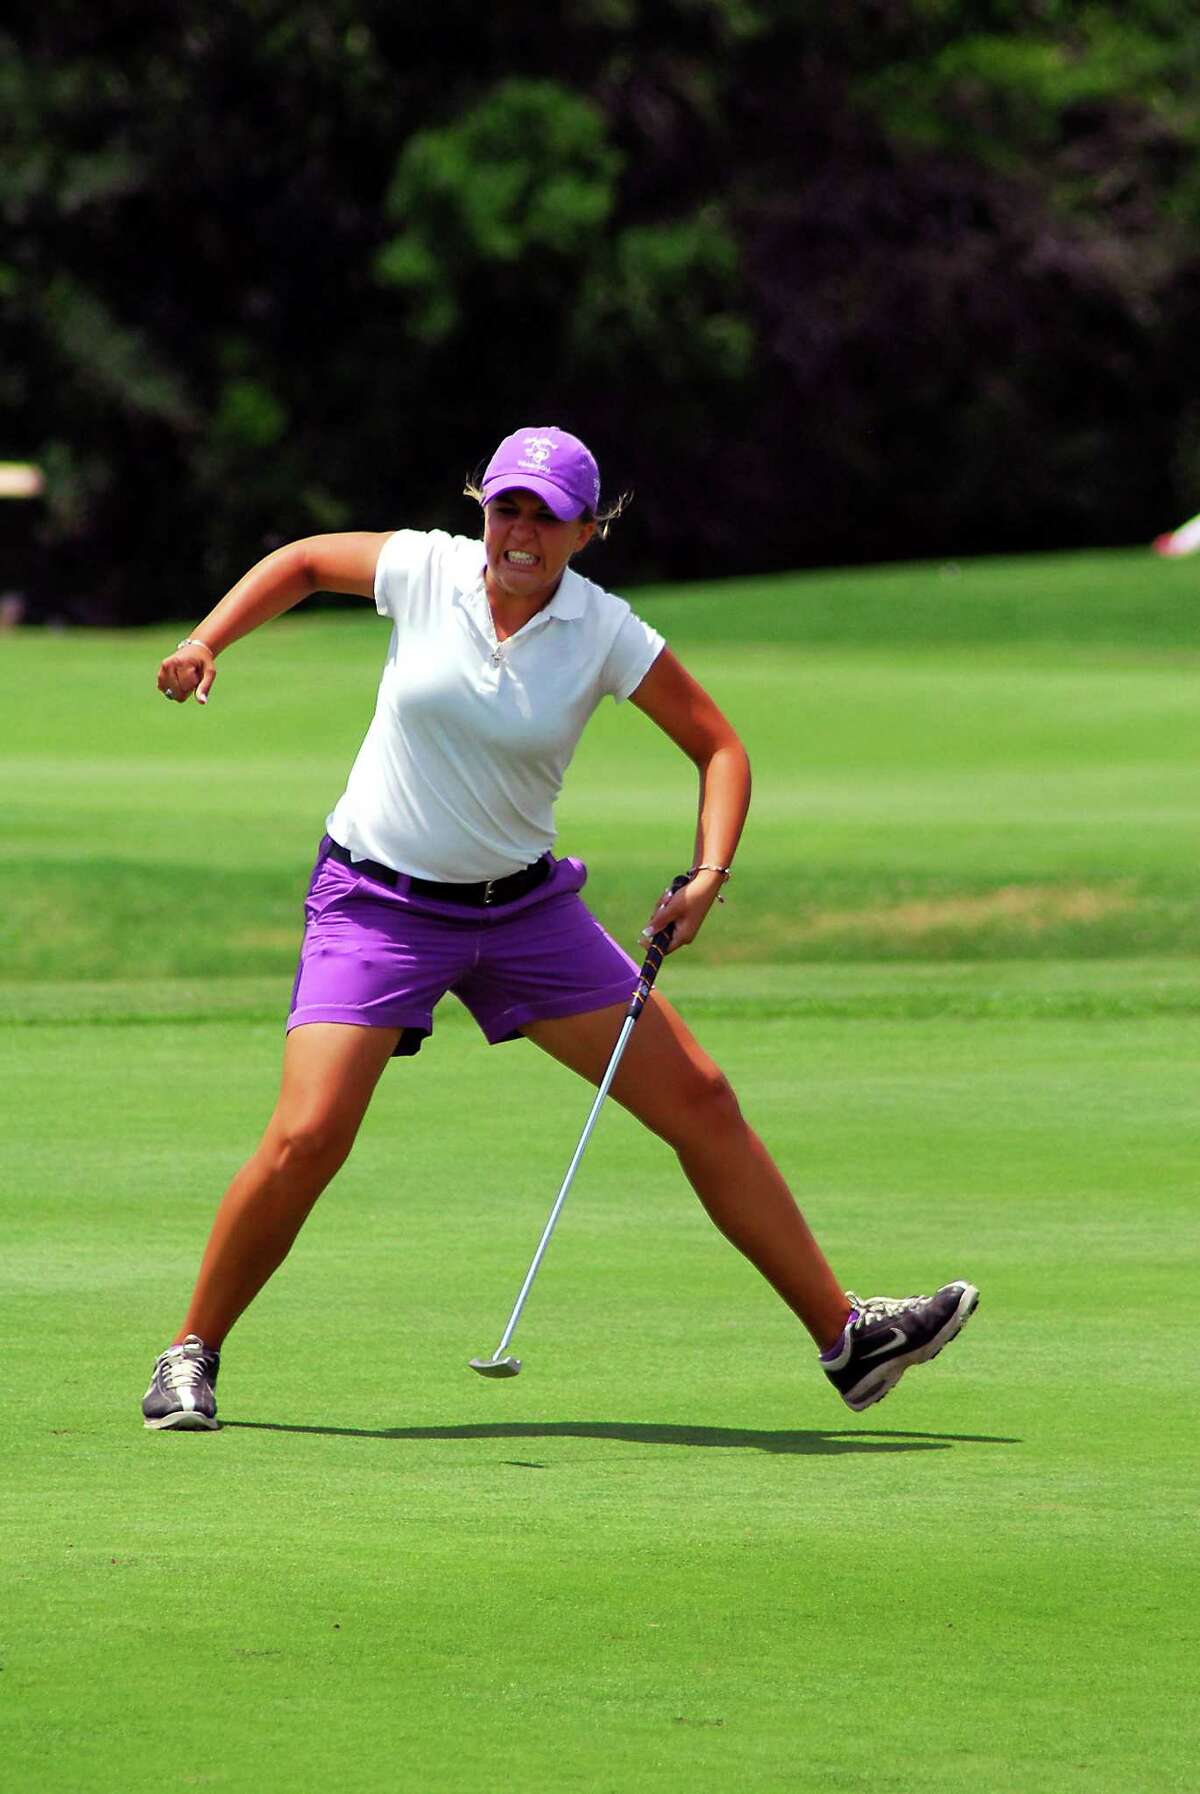 Montgomery Purple senior Abby Oberthier rolls home a par putt and celebrates a 68 to help Montgomery earn its seventh consecutive team 4A state title.